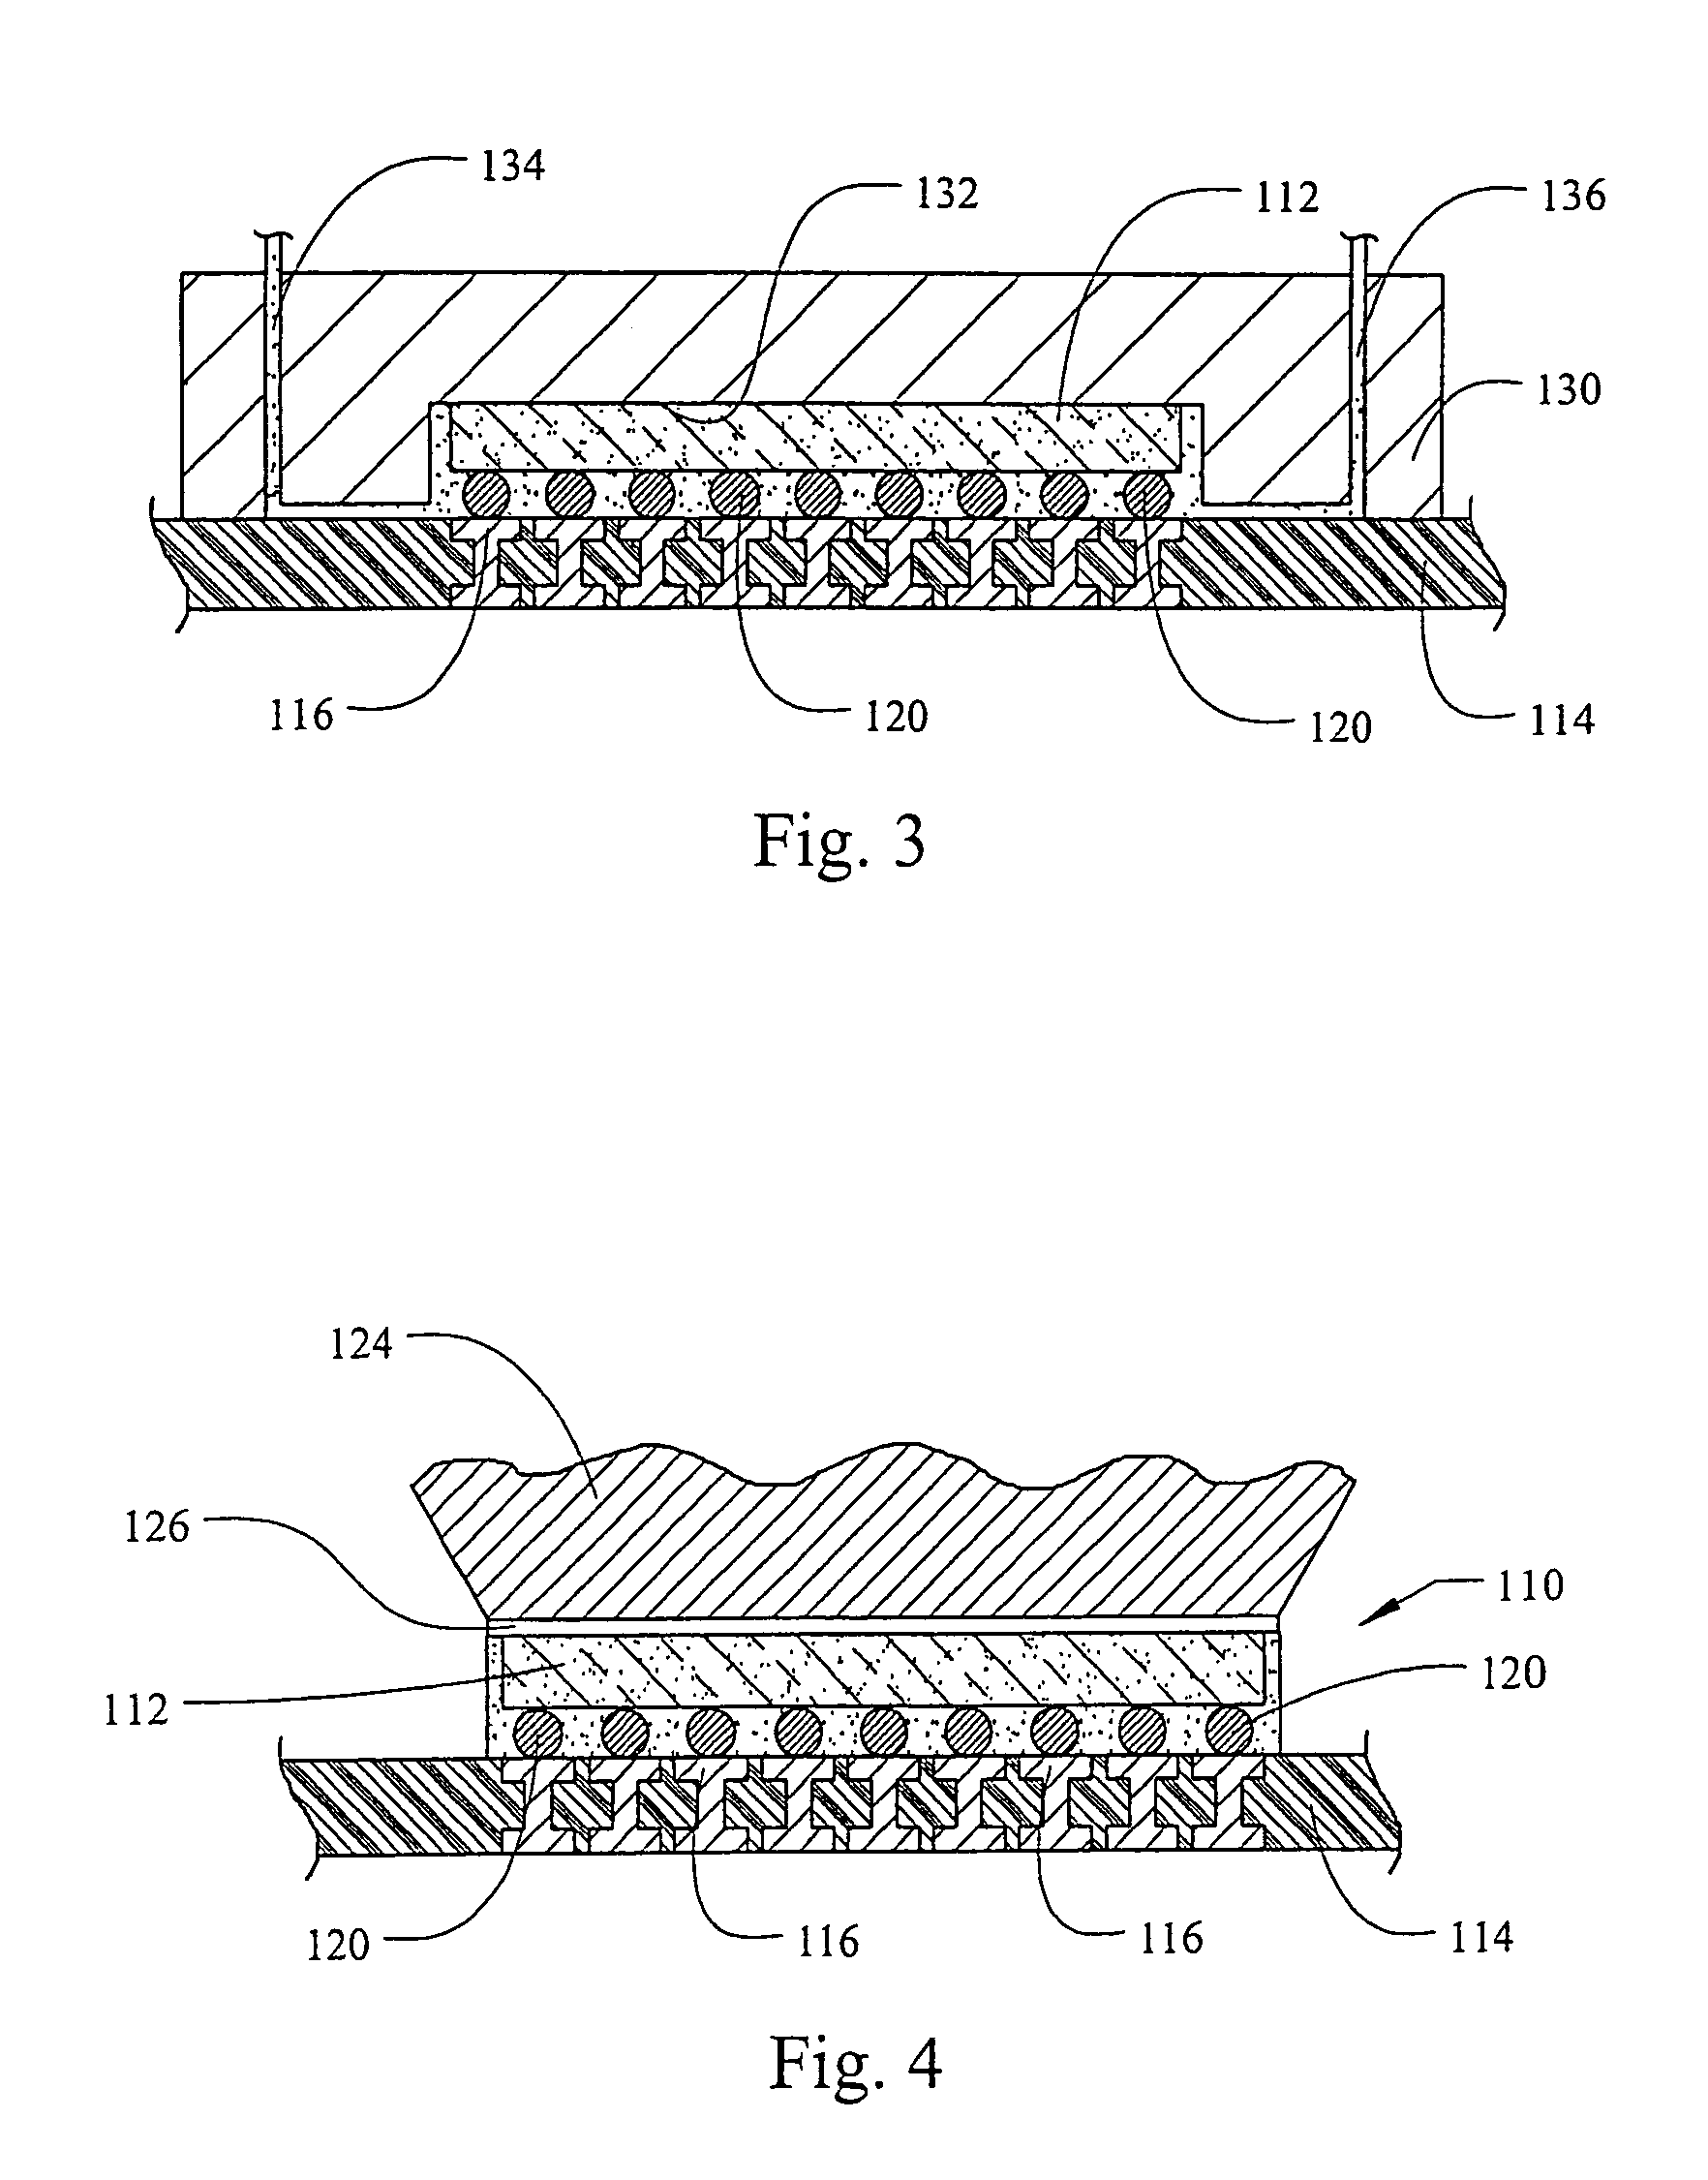 Method of making an electronic assembly